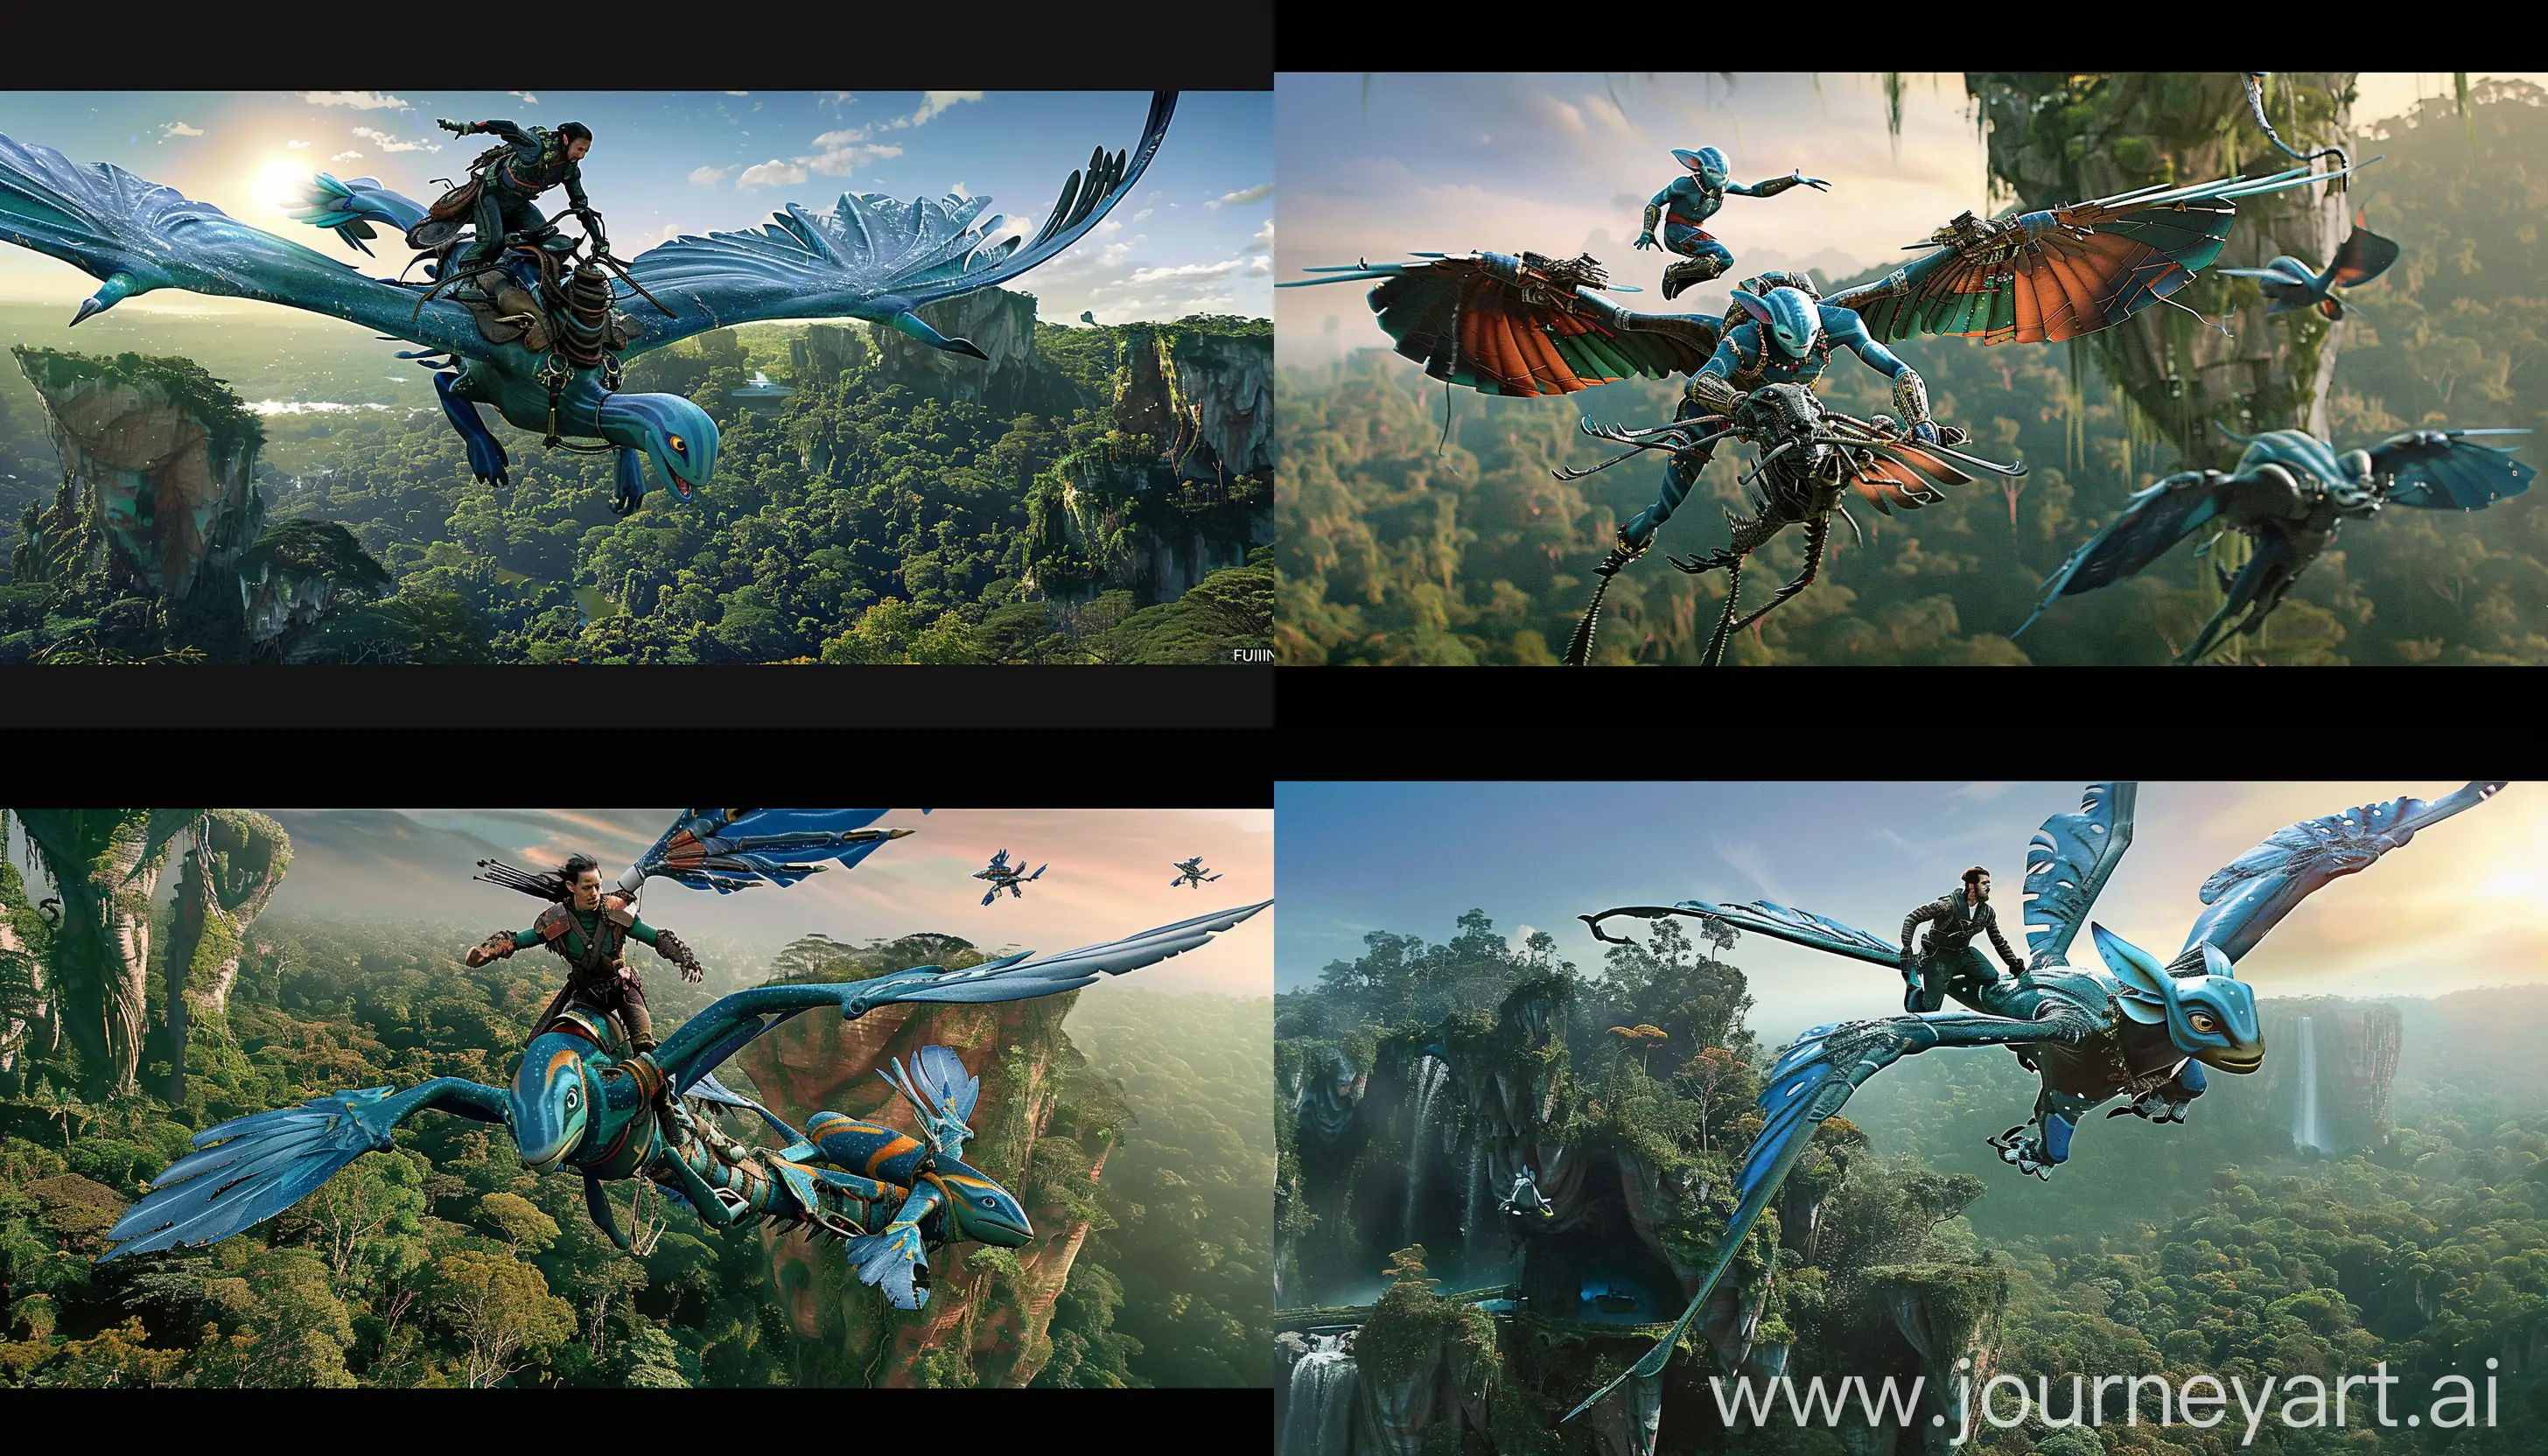 Jake-Sully-Flying-on-a-Banshee-Over-Pandora-Forest-Avatar-The-Way-of-Water